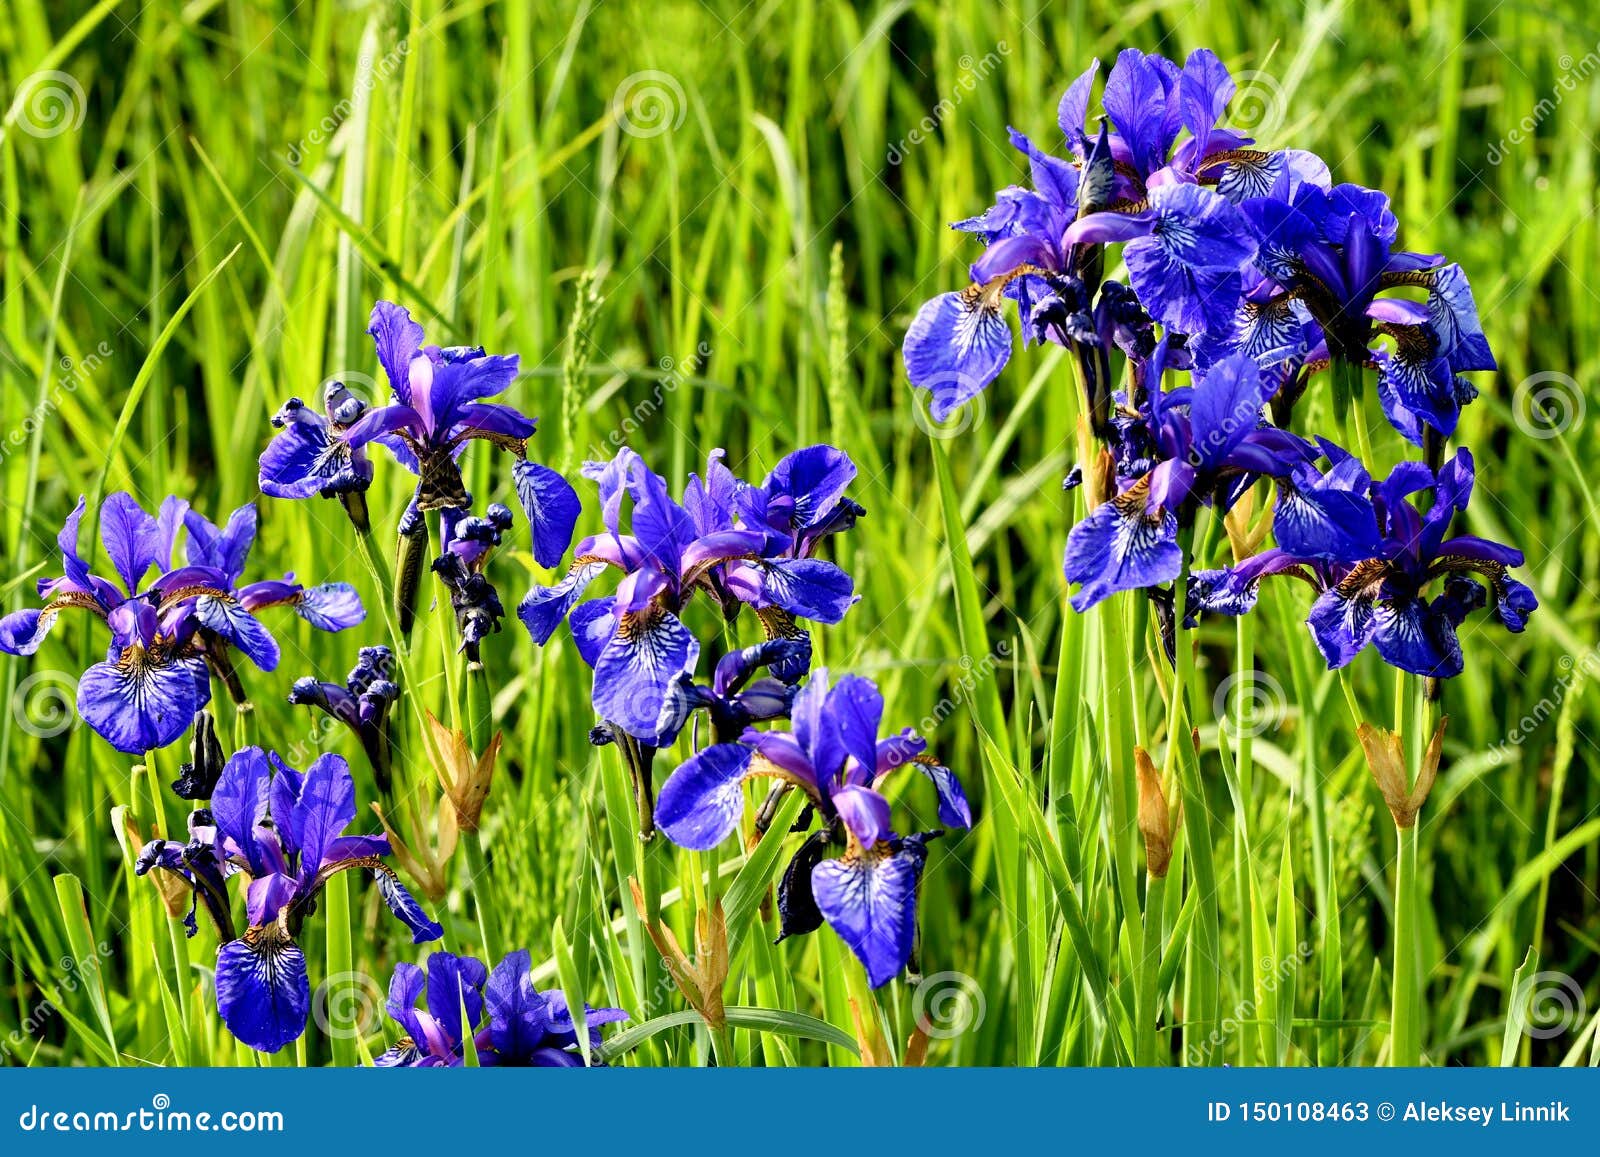 Irises bloom on the field stock image. Image of blossoming - 150108463